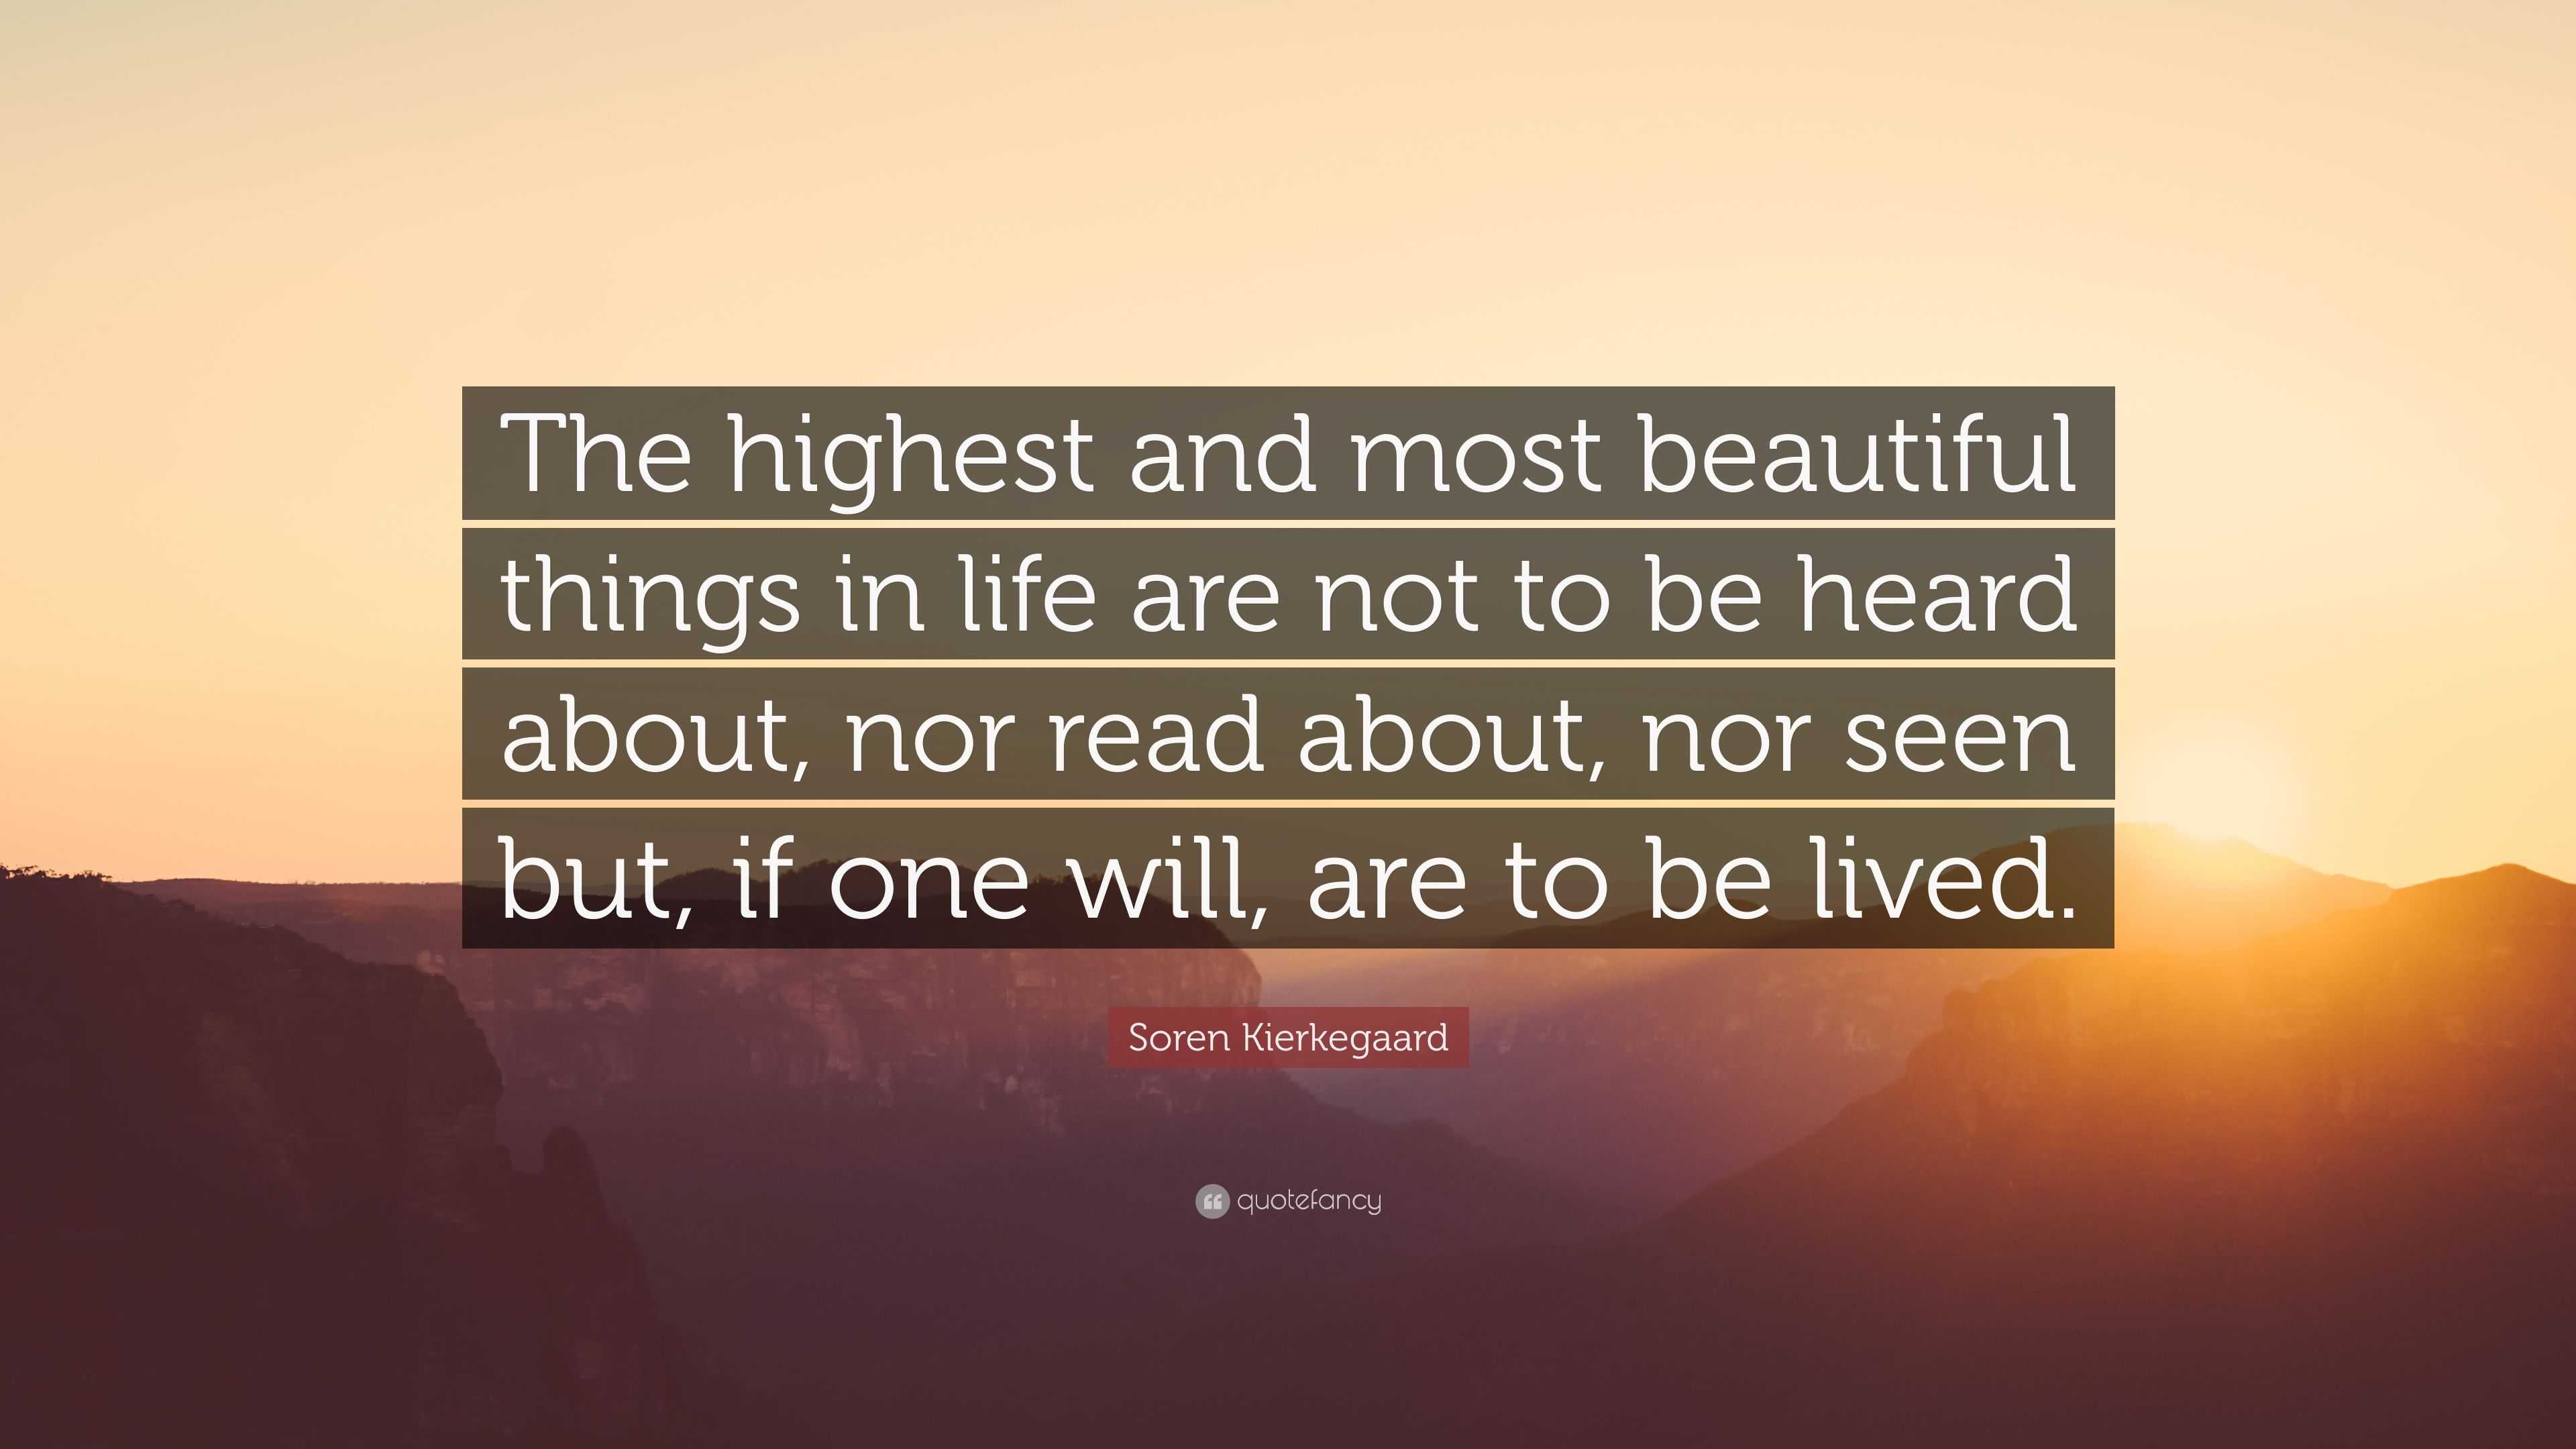 Soren Kierkegaard Quote “The highest and most beautiful things in life are not to